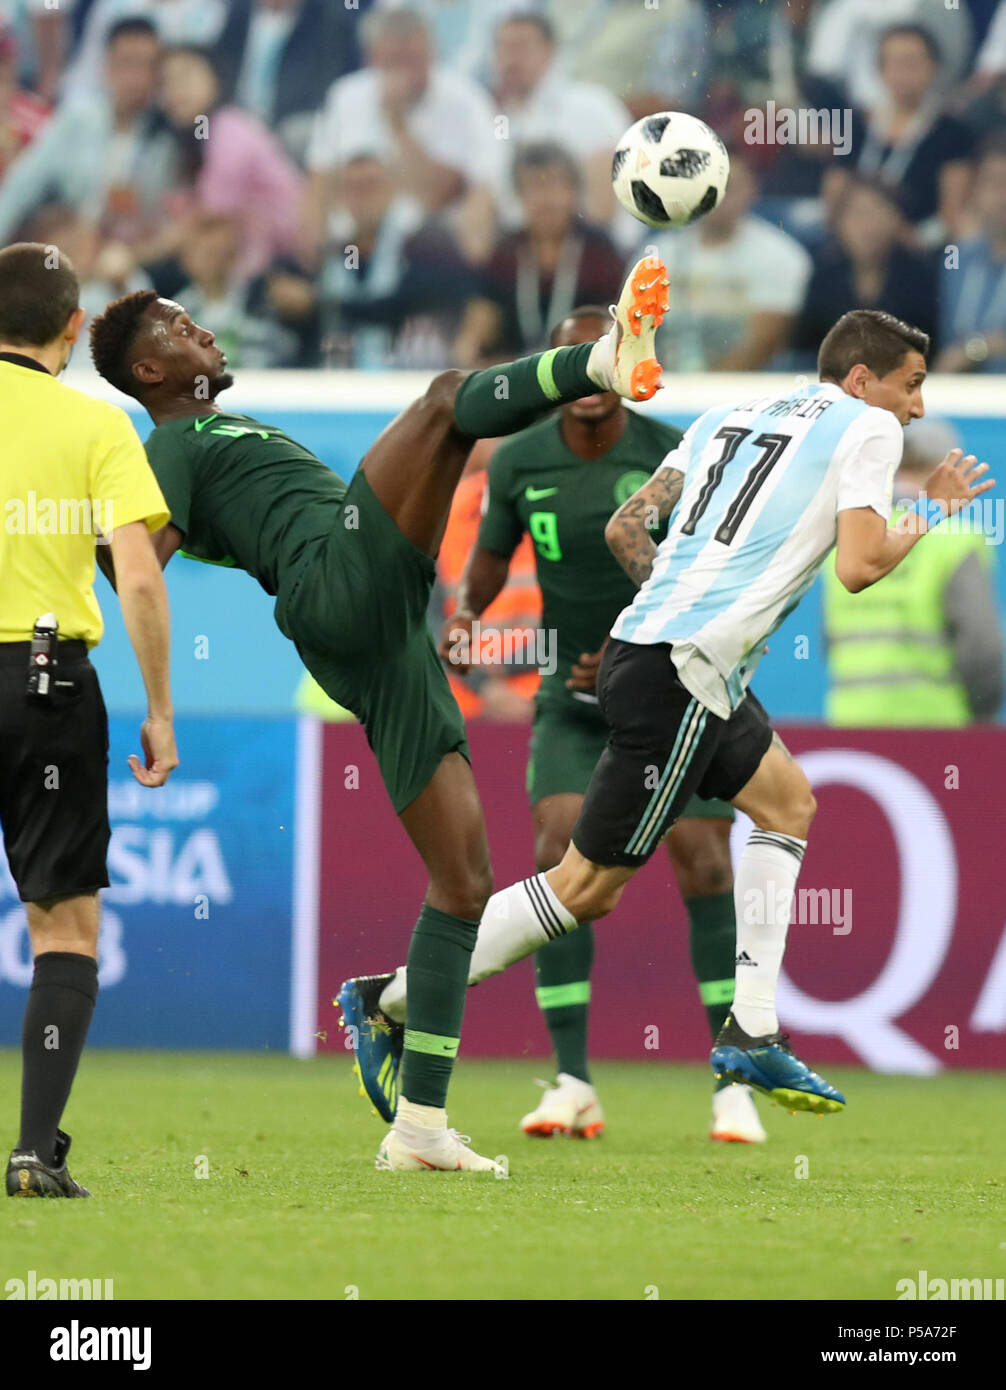 Saint Petersburg, Russia. 26th June, 2018. Wilfred Ndidi (2nd L) of Nigeria competes during the 2018 FIFA World Cup Group D match between Nigeria and Argentina in Saint Petersburg, Russia, June 26, 2018. Credit: Yang Lei/Xinhua/Alamy Live News Stock Photo